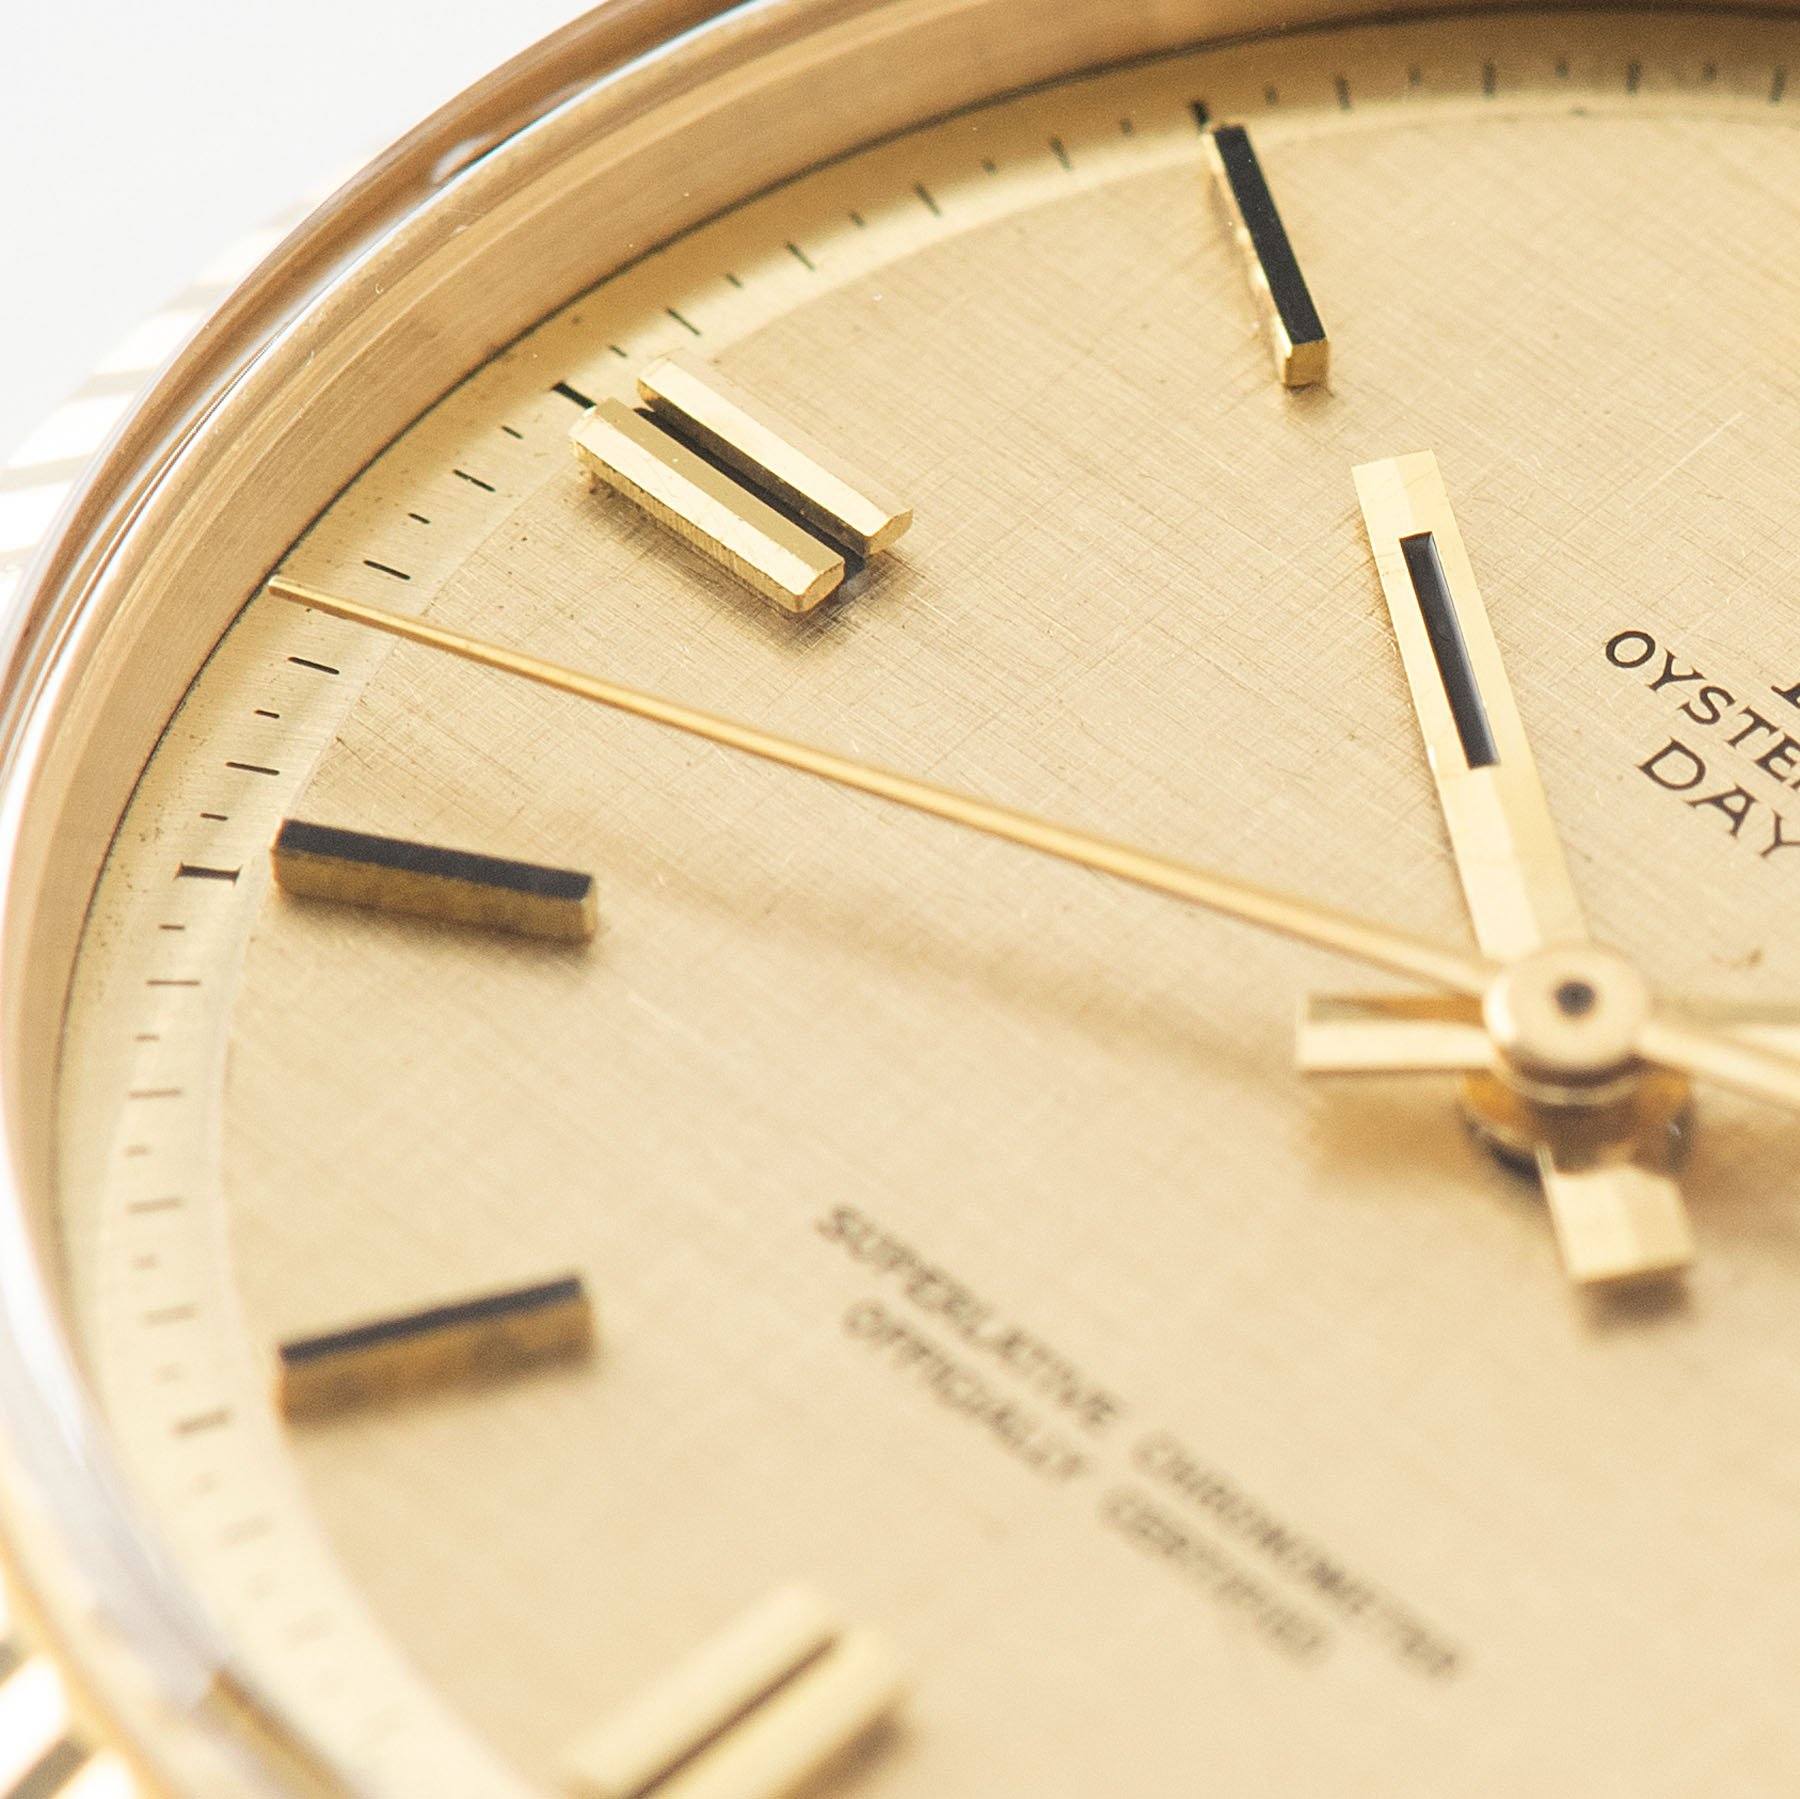 Rolex Day Date Yellow Gold Dial 1803